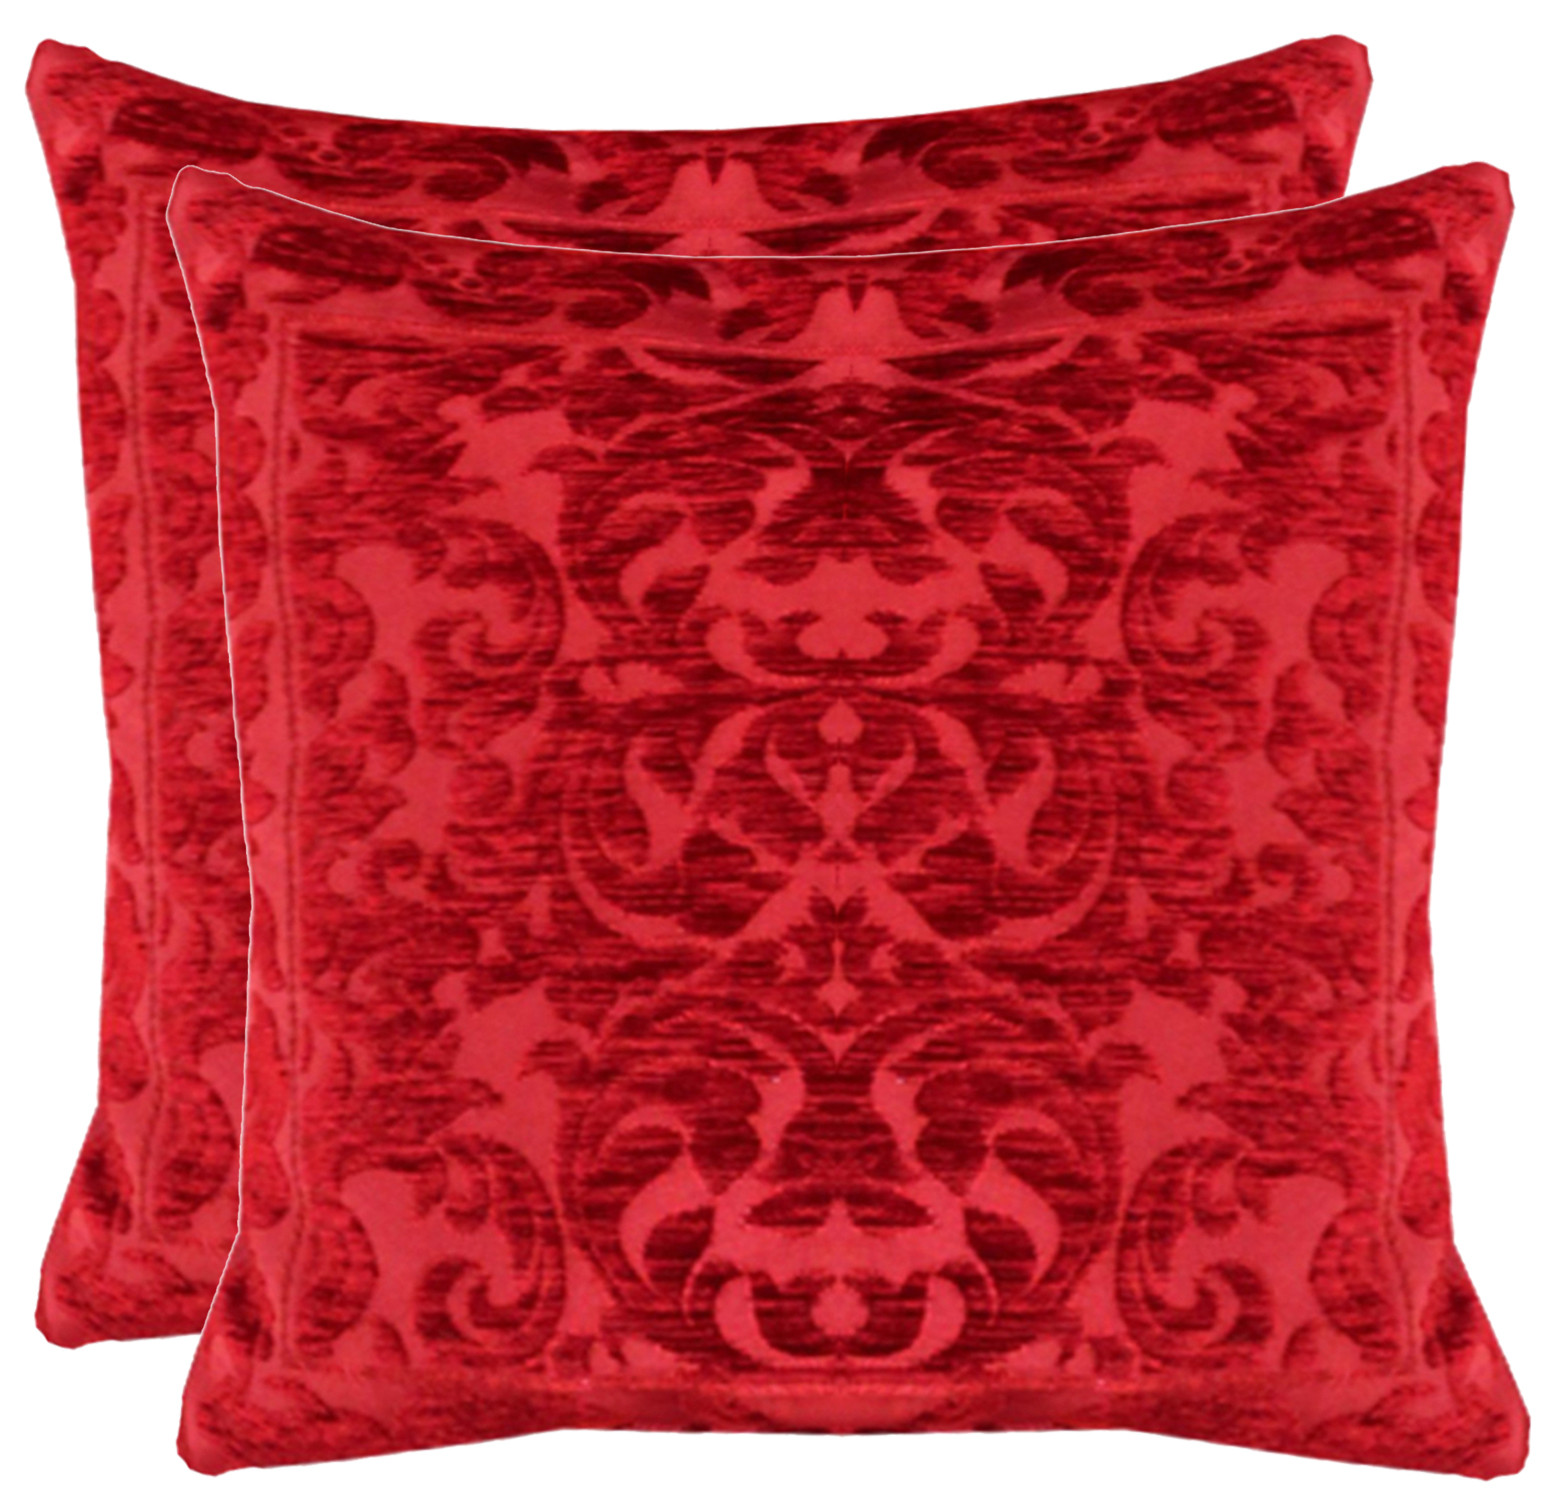 Kuber Industries Velvet Soft Decorative Square Throw Pillow Cover Cushion Covers Pillow case, Home Decor Decorations for Sofa Couch Bed Chair 24x24 Inch (Maroon)